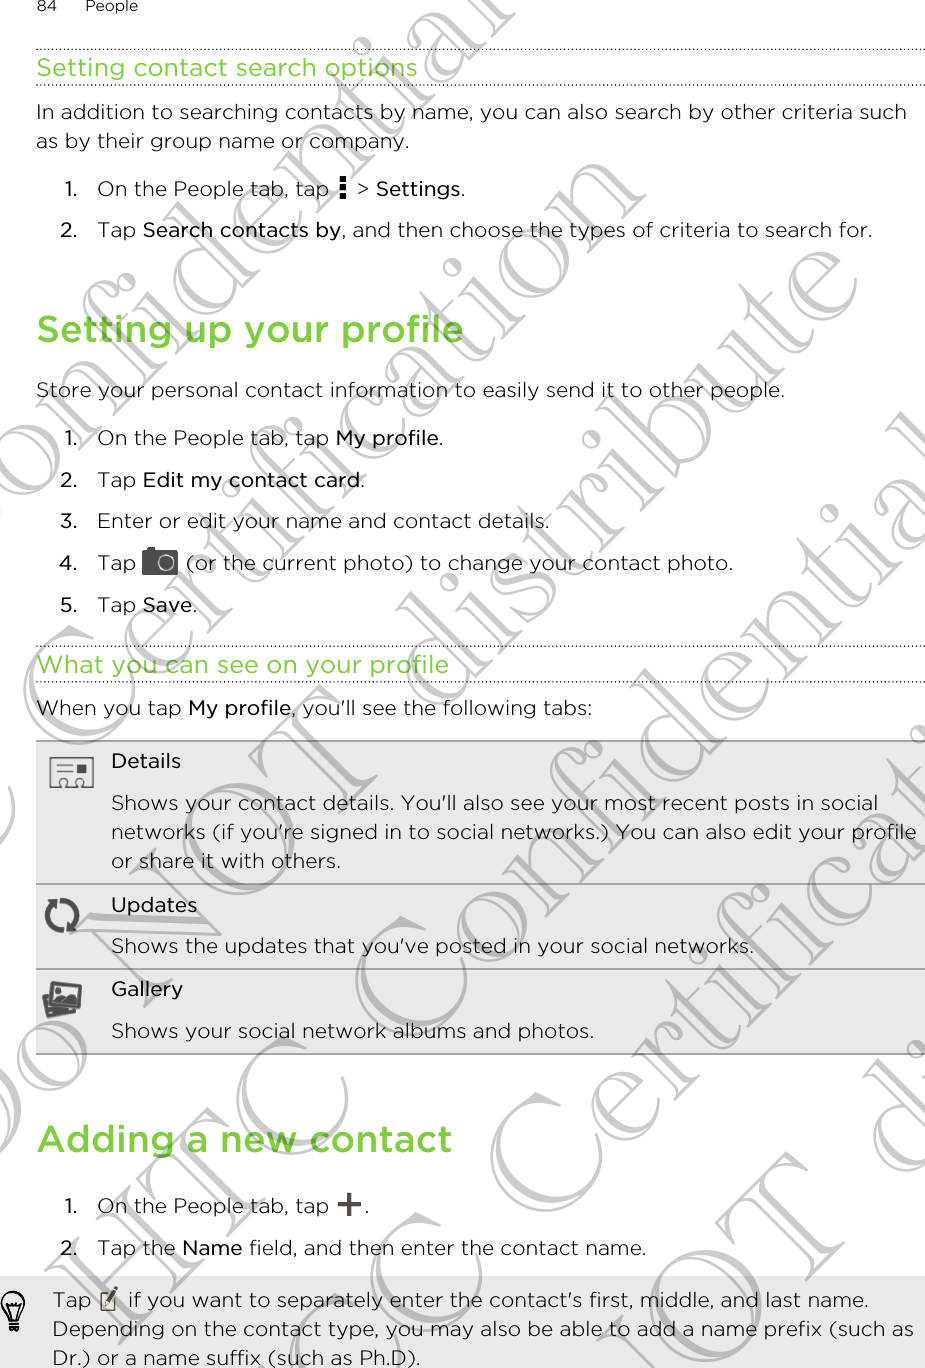 Setting contact search optionsIn addition to searching contacts by name, you can also search by other criteria suchas by their group name or company.1. On the People tab, tap   &gt; Settings.2. Tap Search contacts by, and then choose the types of criteria to search for.Setting up your profileStore your personal contact information to easily send it to other people.1. On the People tab, tap My profile.2. Tap Edit my contact card.3. Enter or edit your name and contact details.4. Tap   (or the current photo) to change your contact photo.5. Tap Save.What you can see on your profileWhen you tap My profile, you&apos;ll see the following tabs:DetailsShows your contact details. You&apos;ll also see your most recent posts in socialnetworks (if you&apos;re signed in to social networks.) You can also edit your profileor share it with others.UpdatesShows the updates that you&apos;ve posted in your social networks.GalleryShows your social network albums and photos.Adding a new contact1. On the People tab, tap  .2. Tap the Name field, and then enter the contact name. Tap   if you want to separately enter the contact&apos;s first, middle, and last name.Depending on the contact type, you may also be able to add a name prefix (such asDr.) or a name suffix (such as Ph.D).84 PeopleHTC Confidential FCC Certification Do NOT distribute HTC Confidential FCC Certification Do NOT distribute